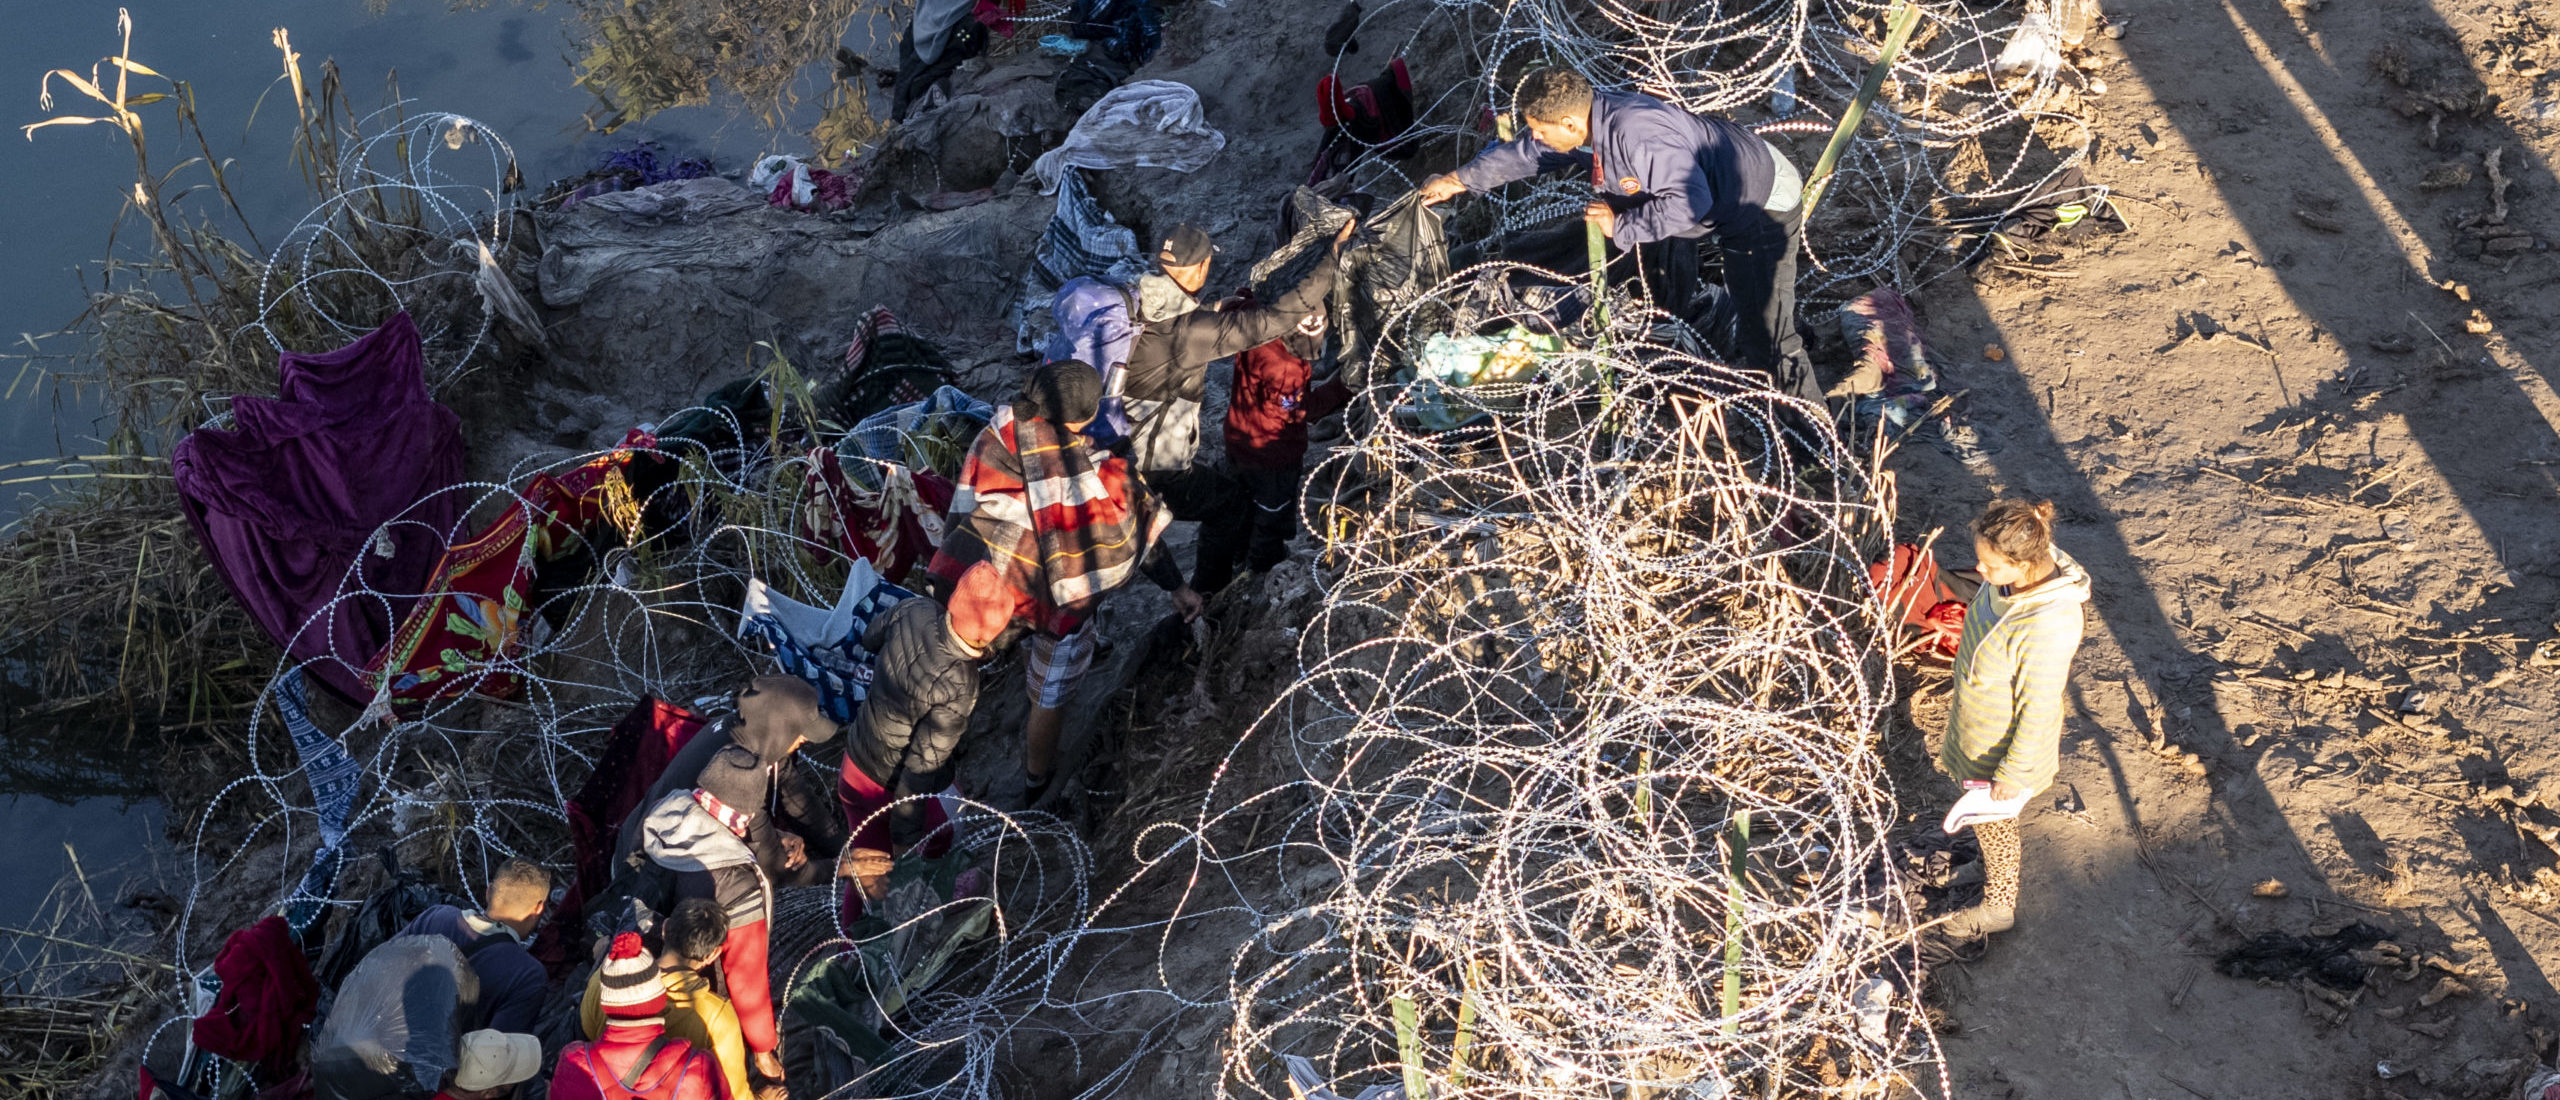 EAGLE PASS, TEXAS - DECEMBER 18: As seen from an aerial view immigrants climb through razor wire after crossing the Rio Grande from Mexico on December 18, 2023 in Eagle Pass, Texas. A surge as many as 12,000 immigrants per day crossing the U.S. southern border has overwhelmed U.S. immigration authorities in recent weeks. (Photo by John Moore/Getty Images)